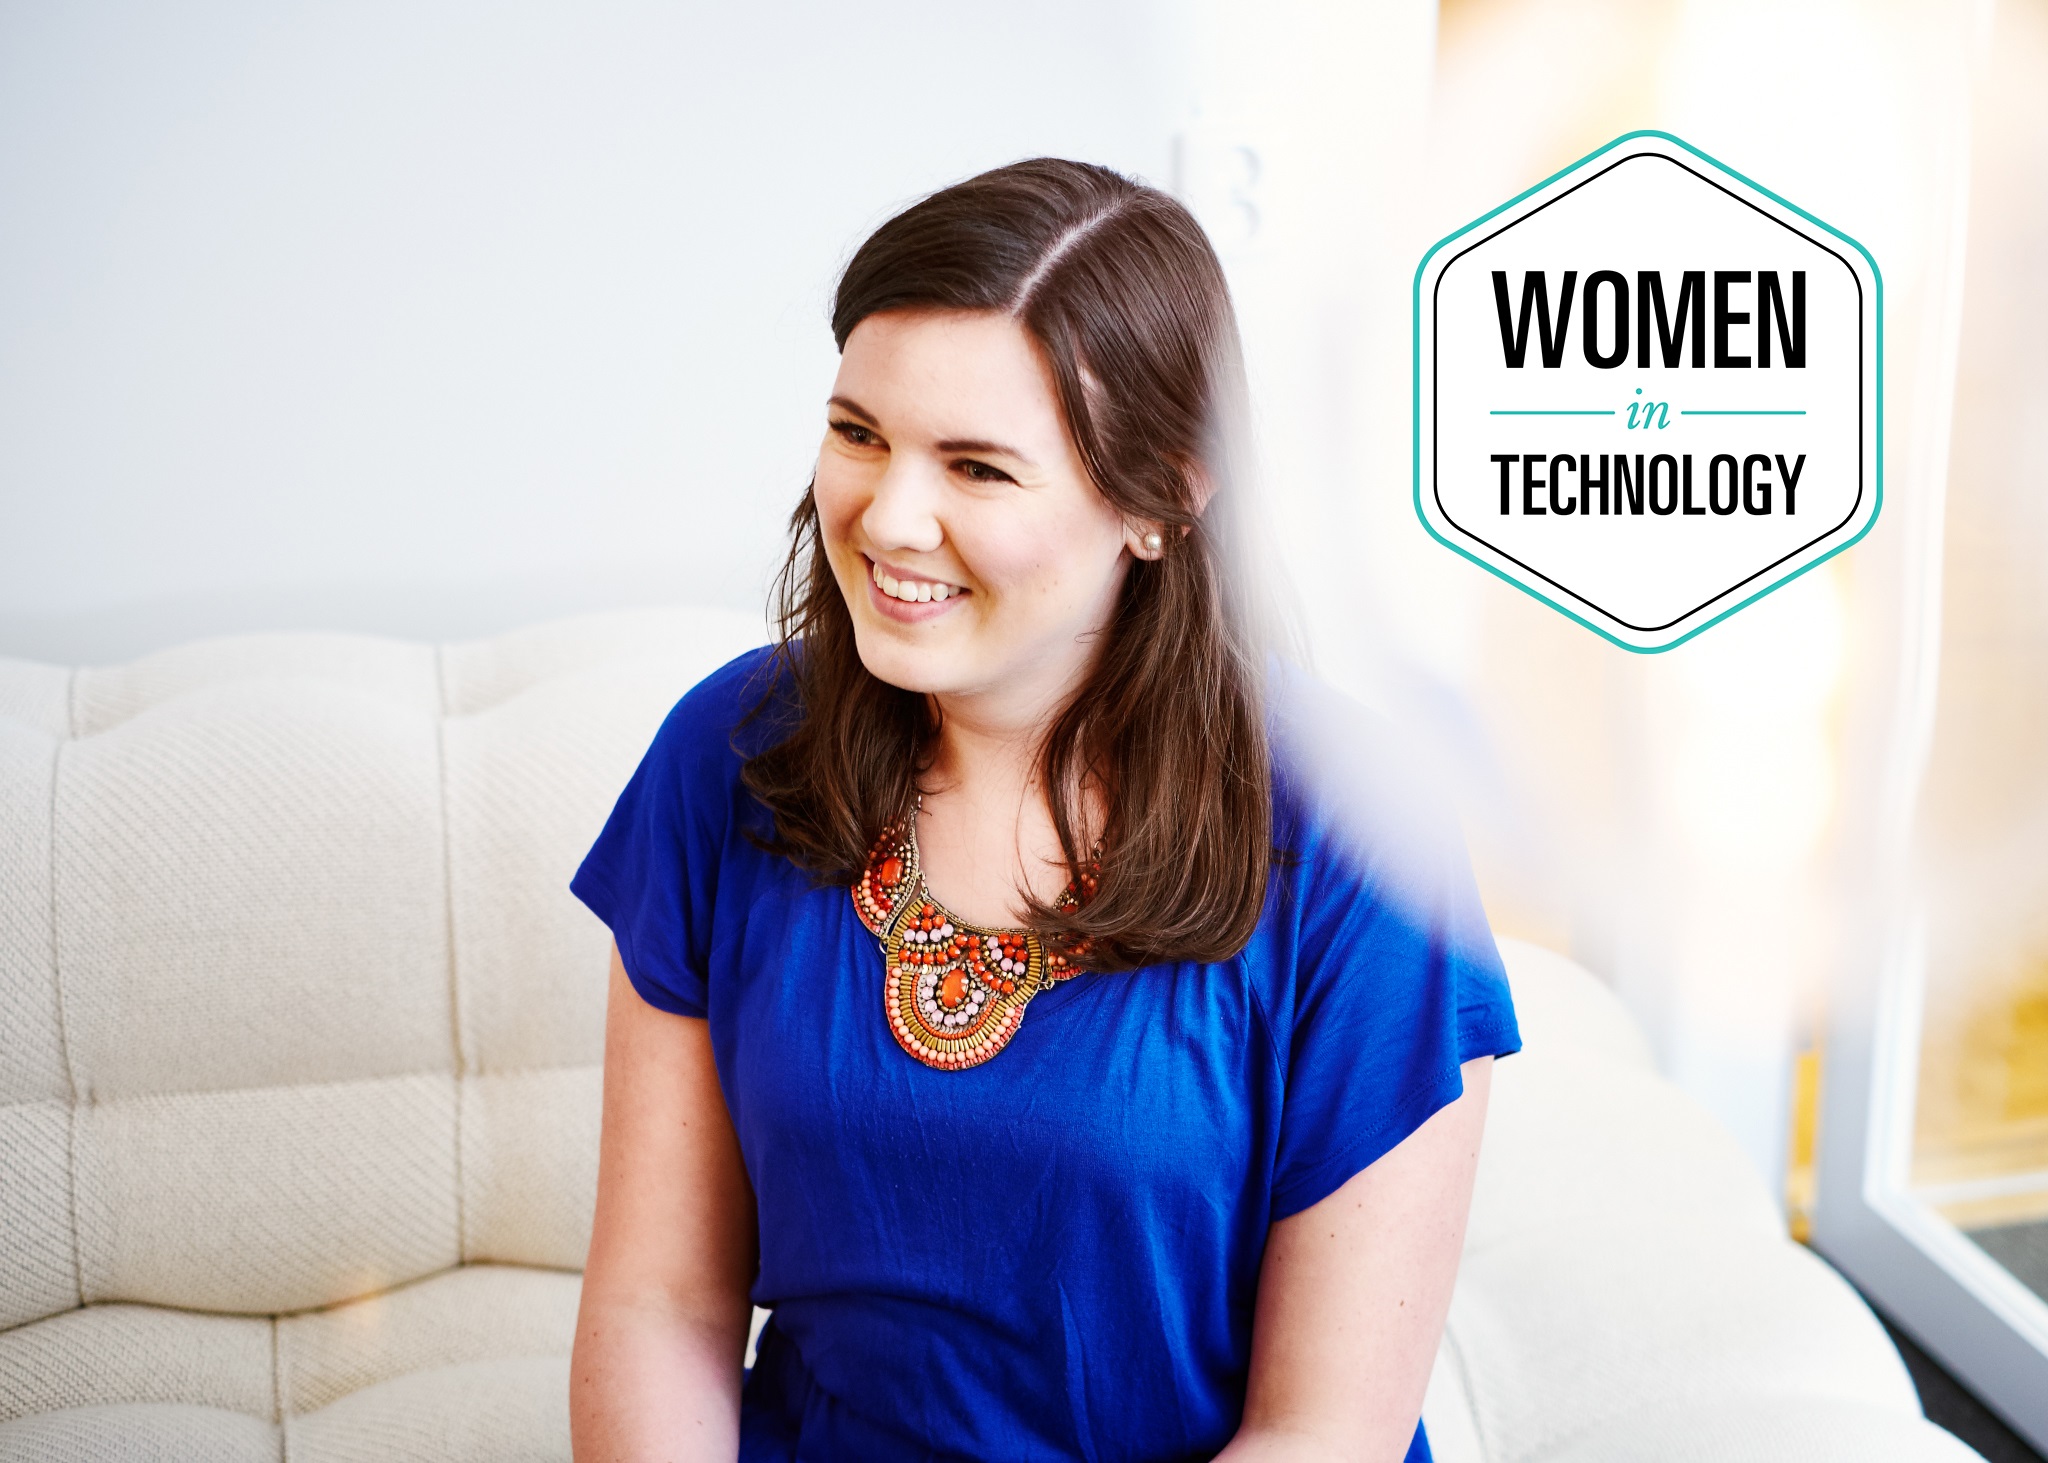 Women in technology: 3 Questions about IT to Johanna